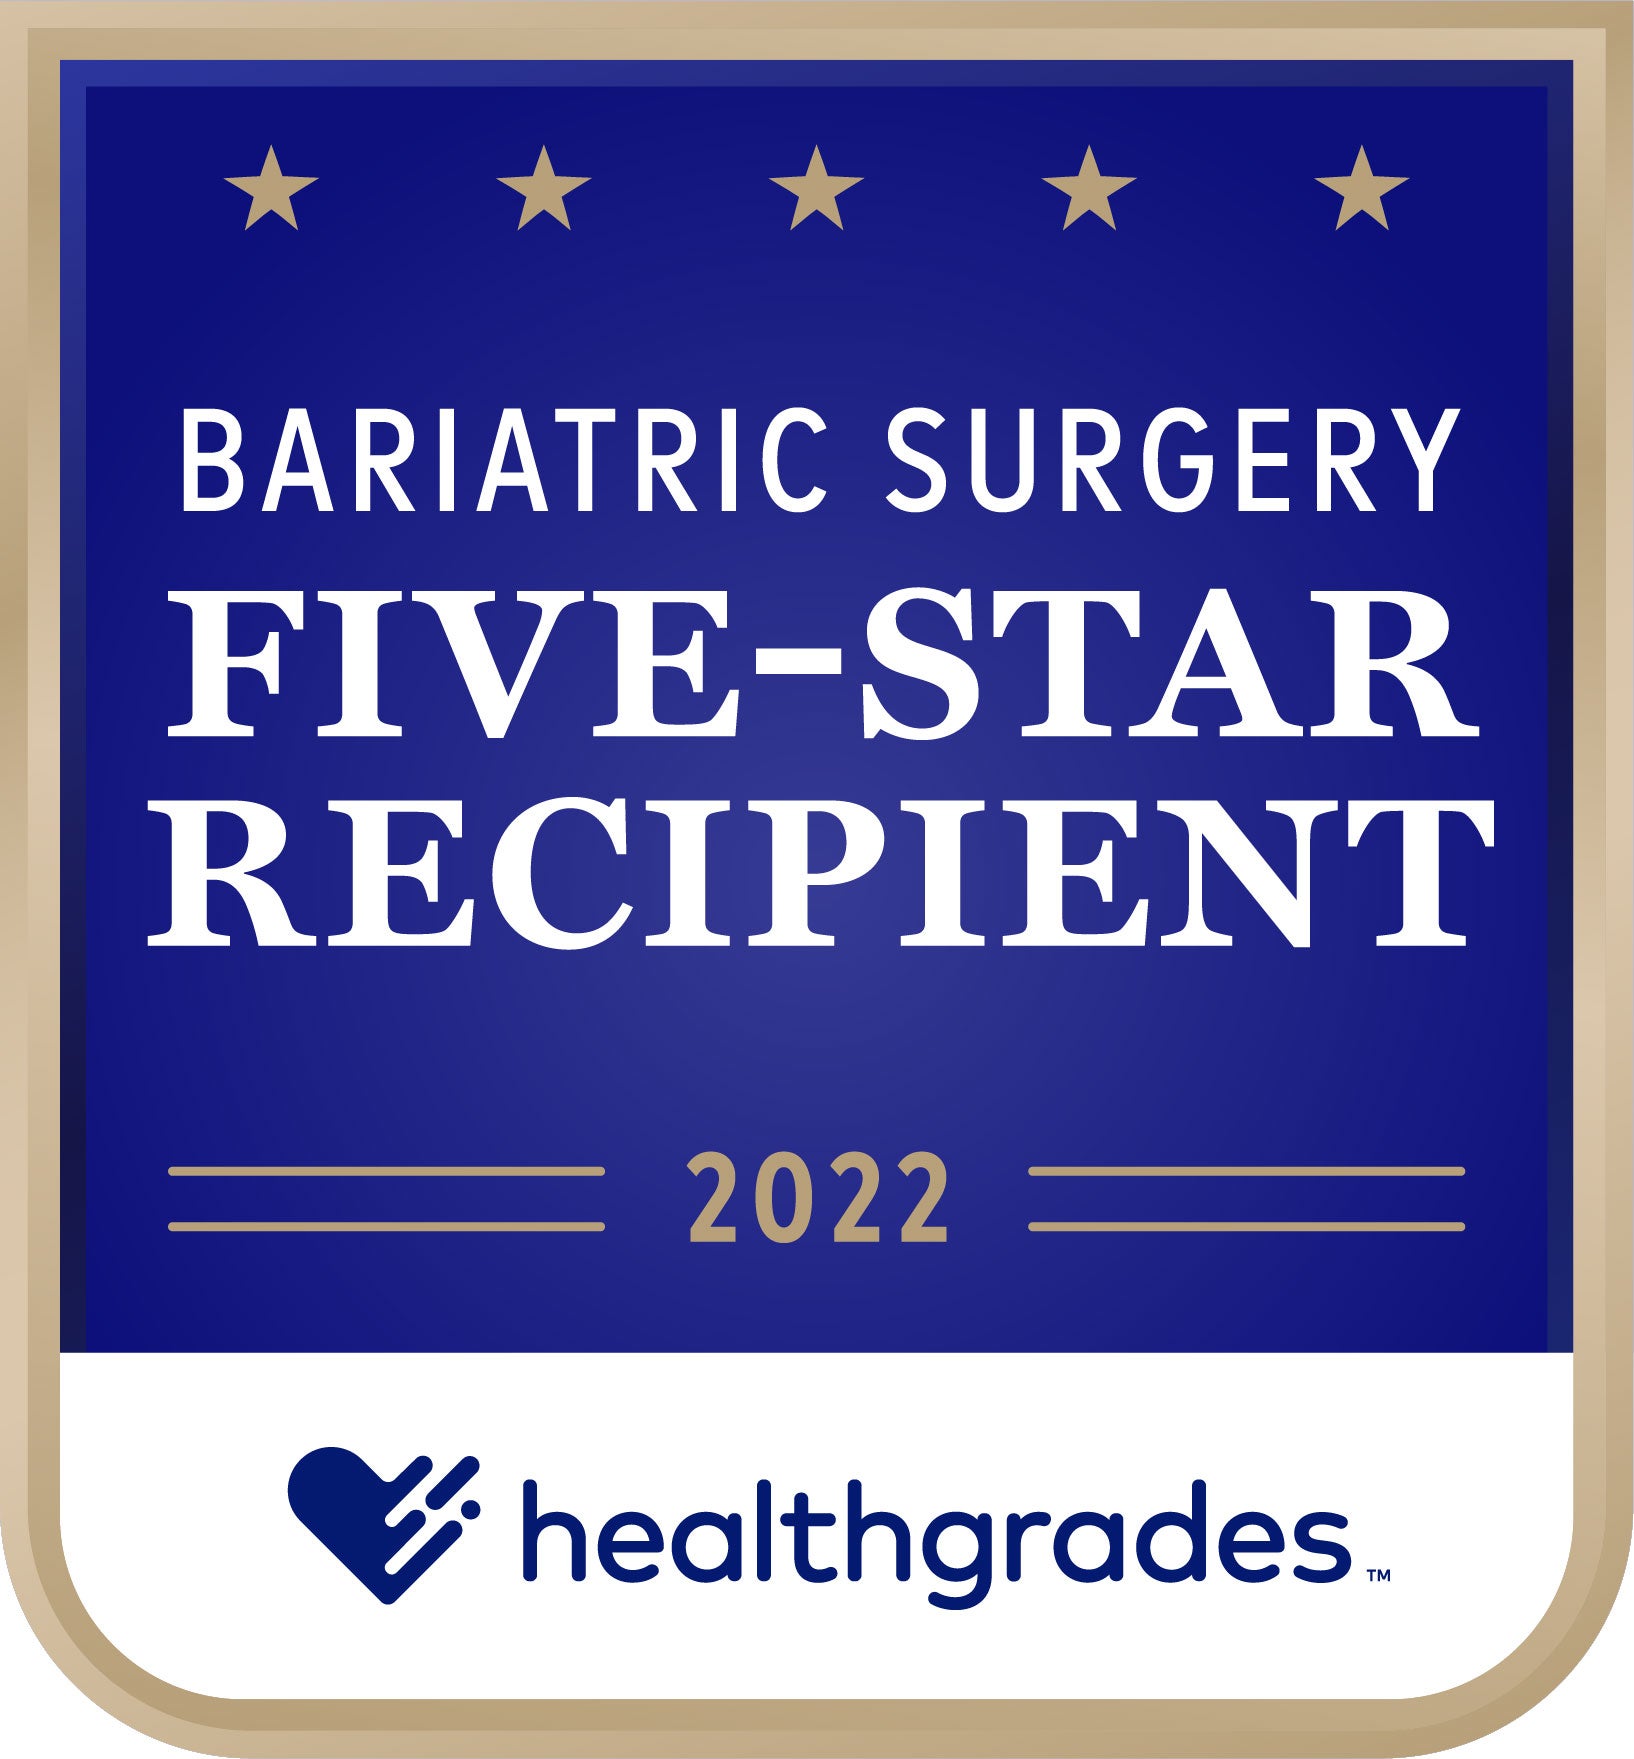 Recipient of the Healthgrades Bariatric Surgery Excellence Award™ for 2022